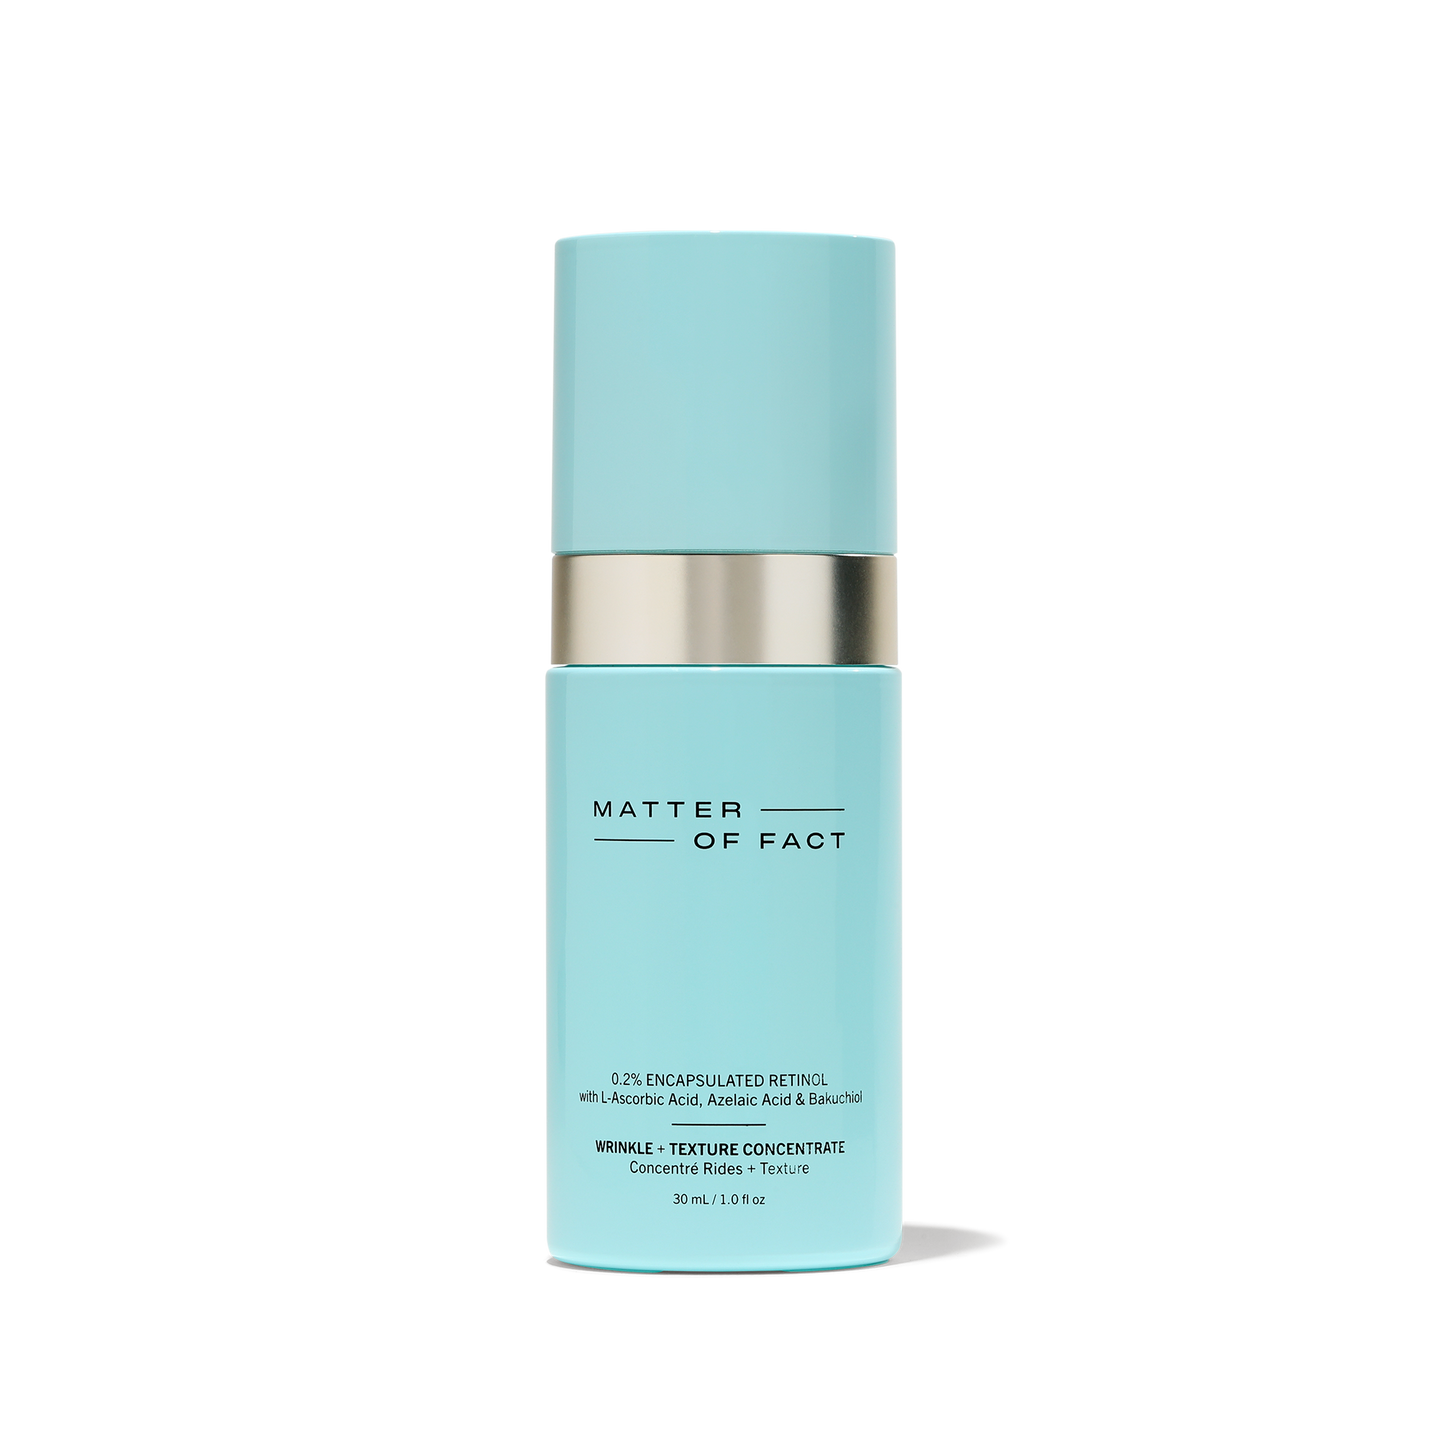 MATTER OF FACT SKINCARE WRINKLE AND TEXTURE CONCENTRATE full-size product 30mL